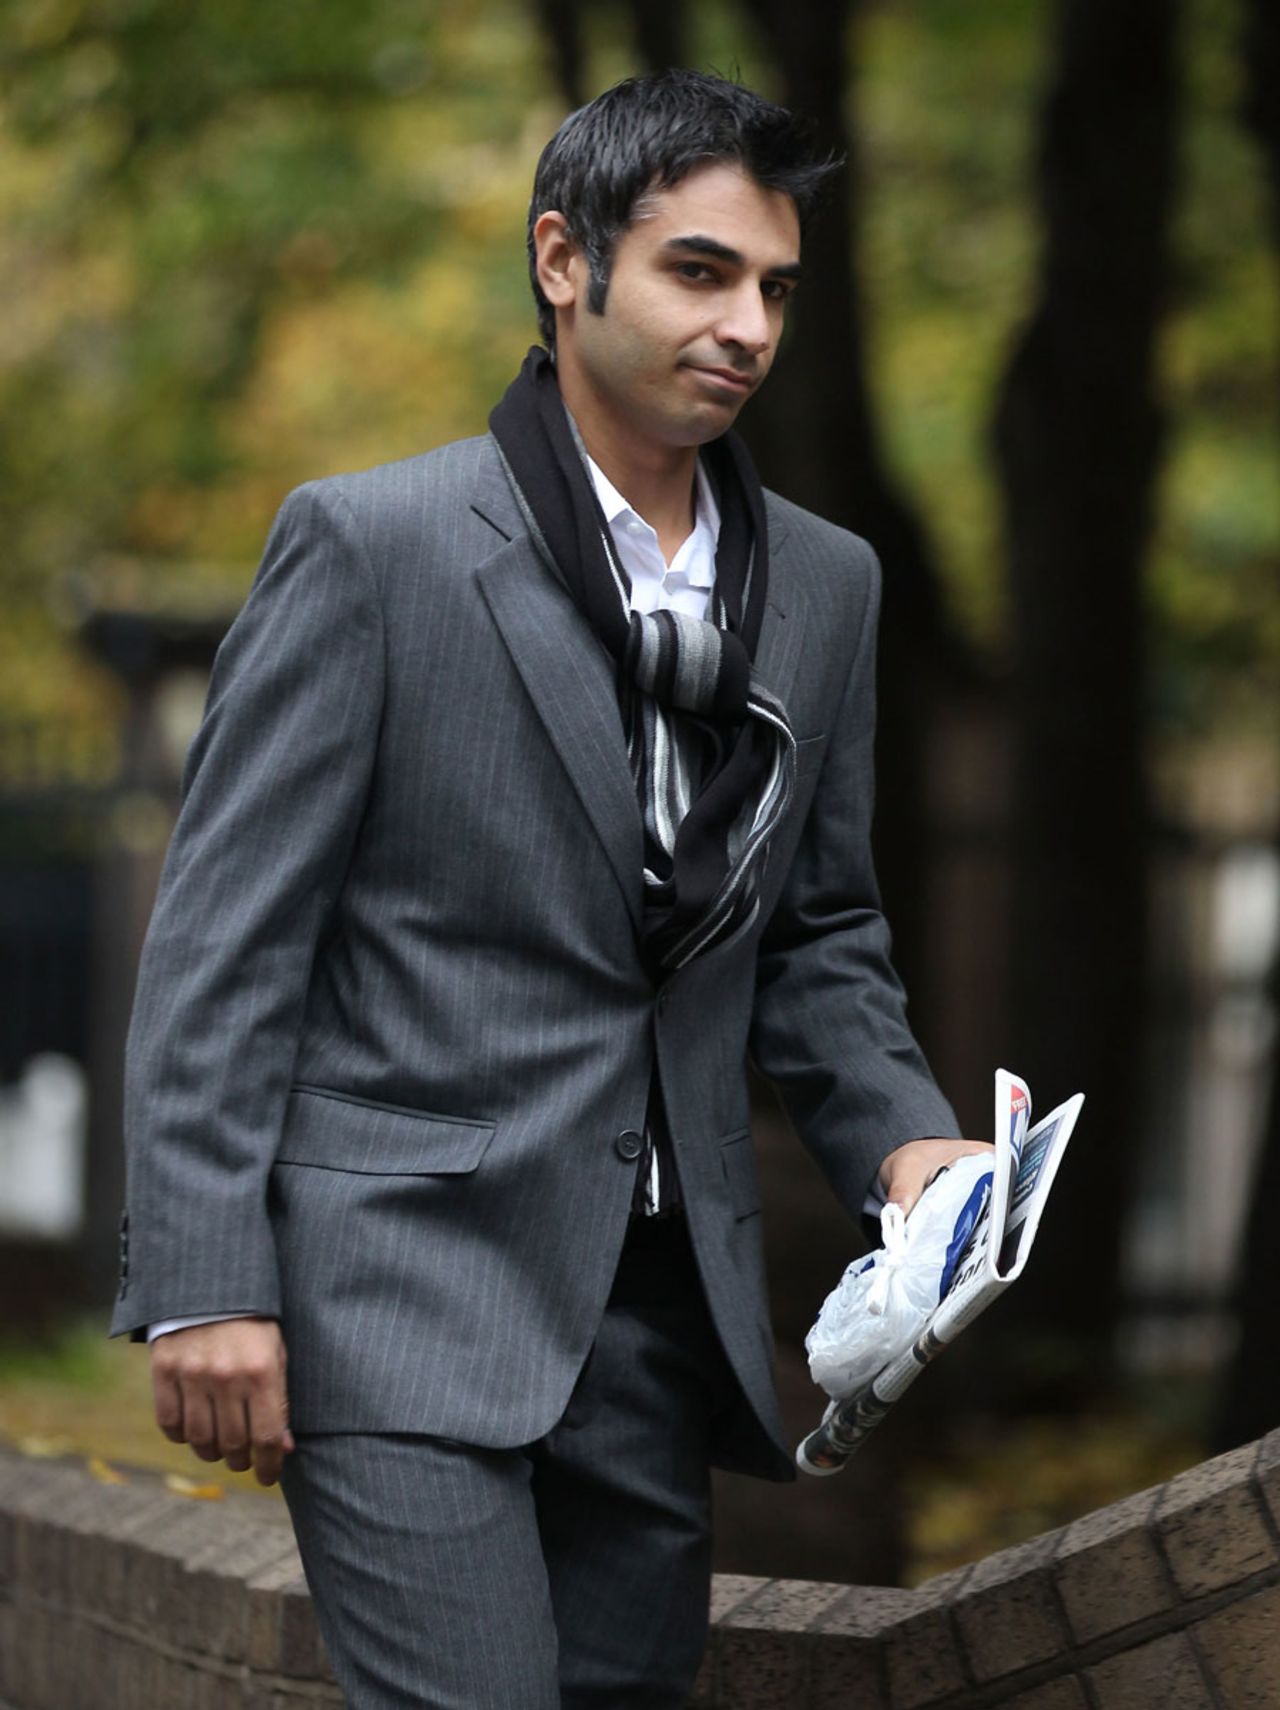 Salman Butt makes his way to the Southwark Crown Court, London, October 31, 2011